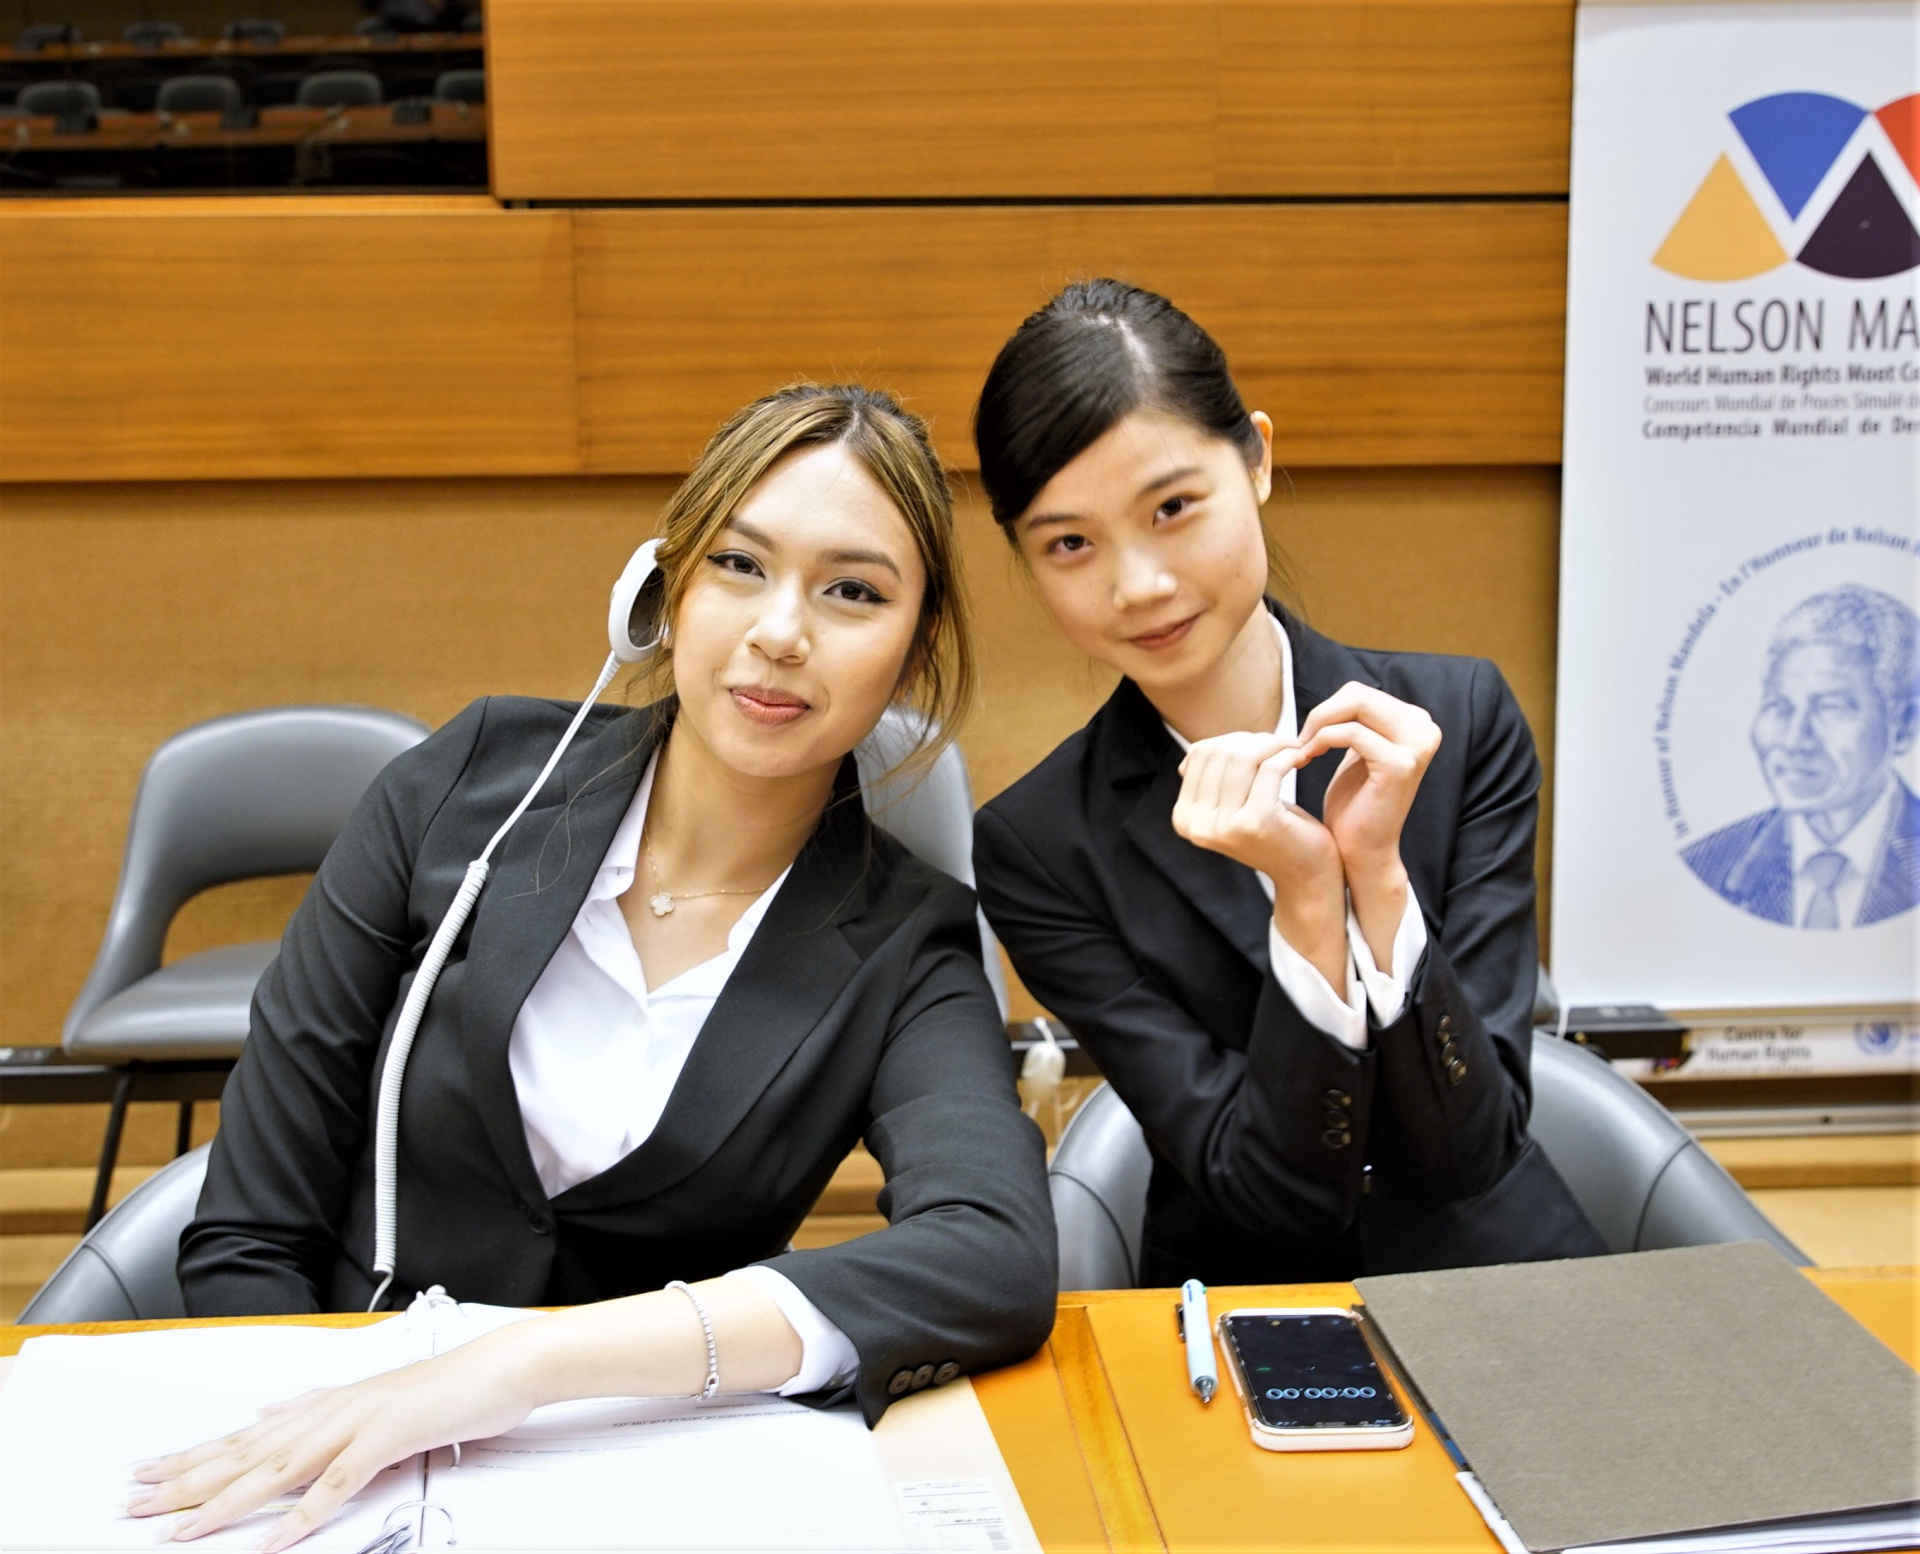 Two students take part in the Nelson Mandela World Human Rights Moot Court Competition